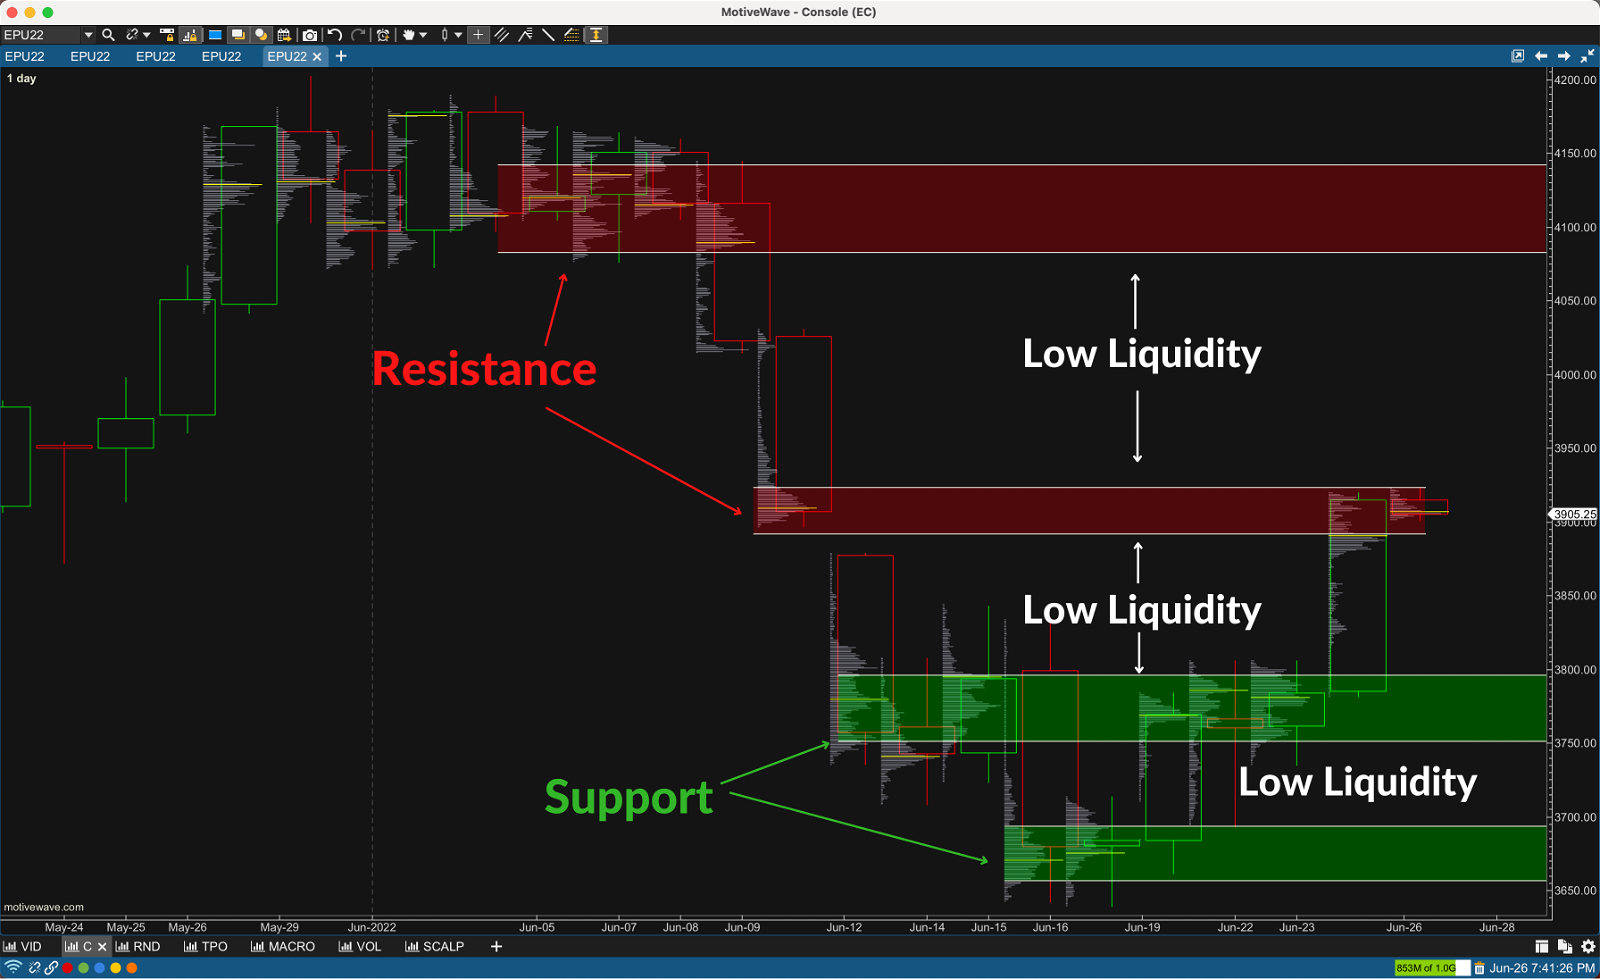 Volume Footprint chart highlighting support and resistance high volume nodes and zones of low liquidity